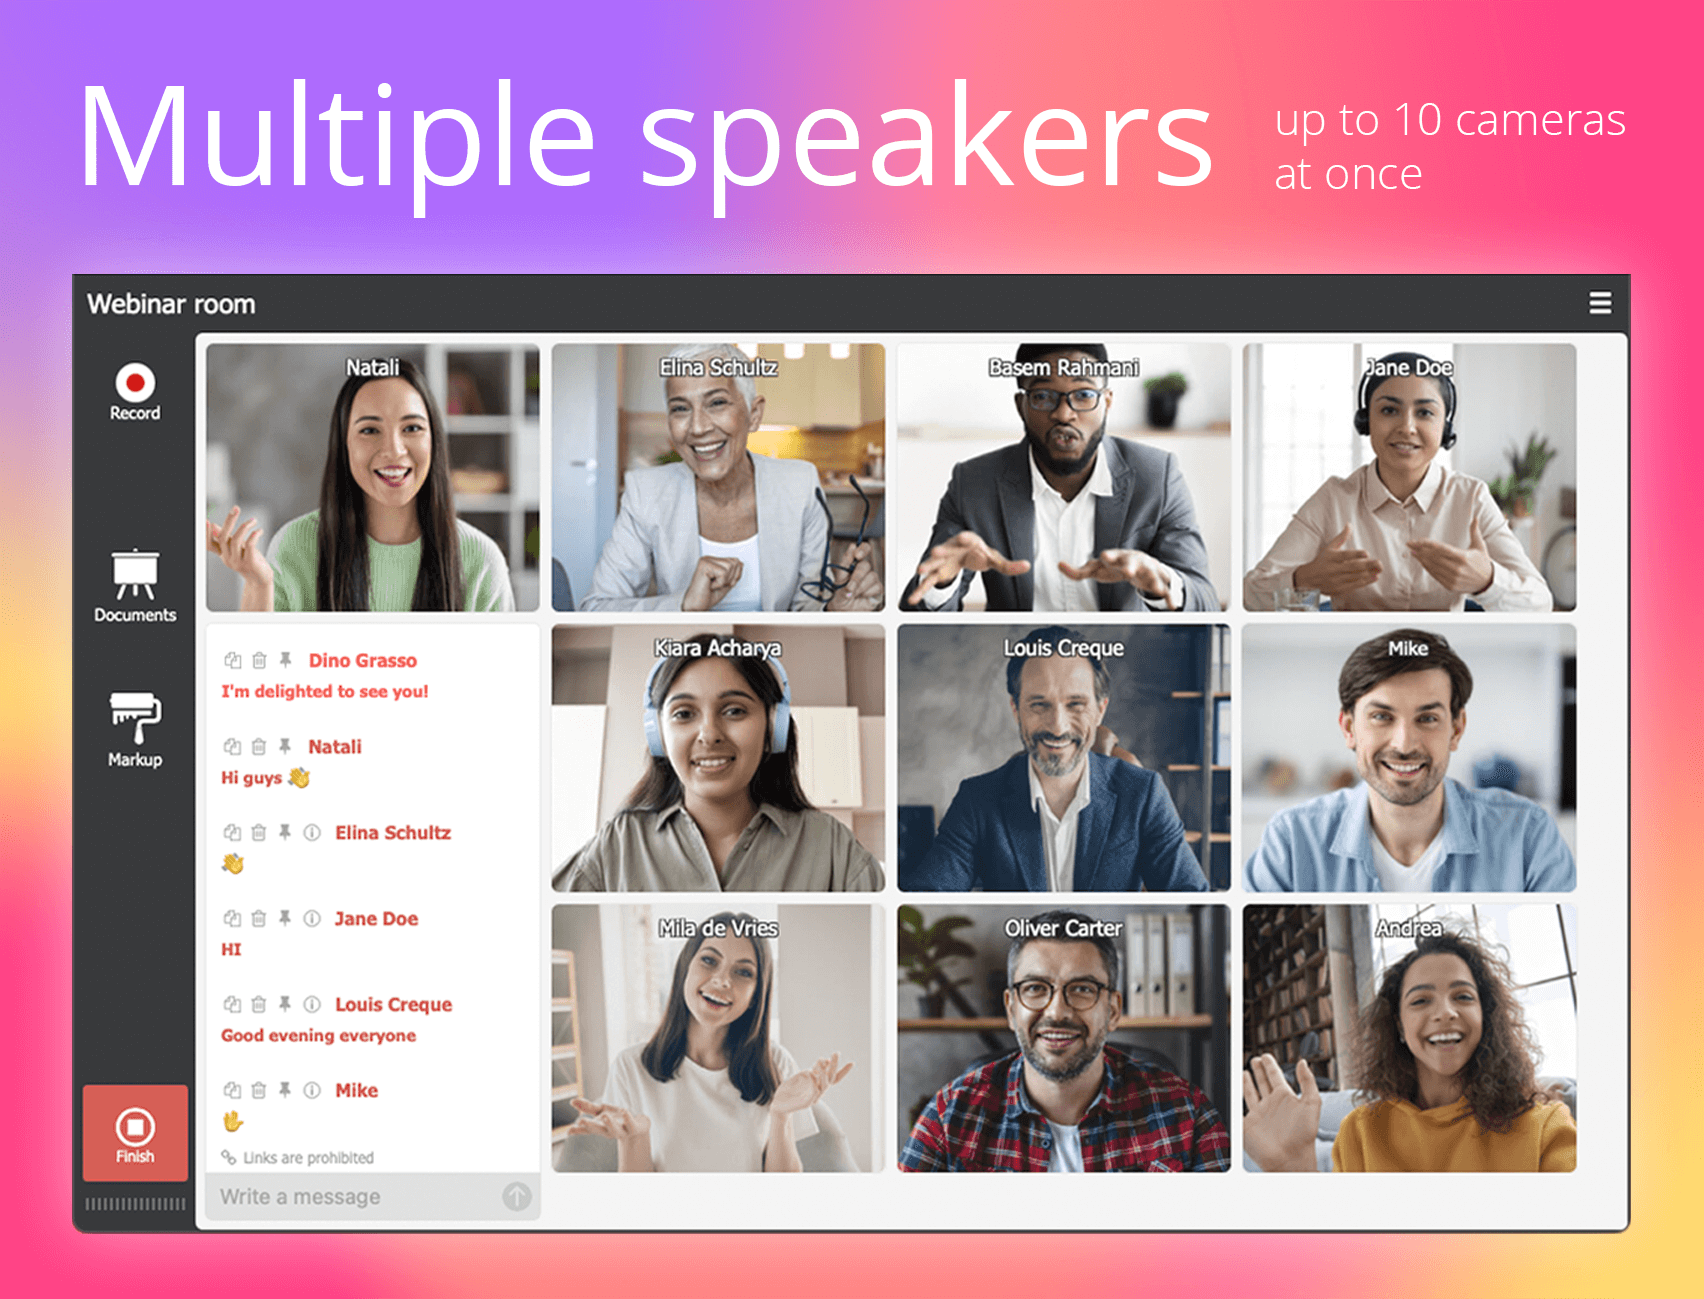 MyOwnConference Software - Multiple speakers! Broadcast up to 10 presenters/attendees at once for a collaborative experience.